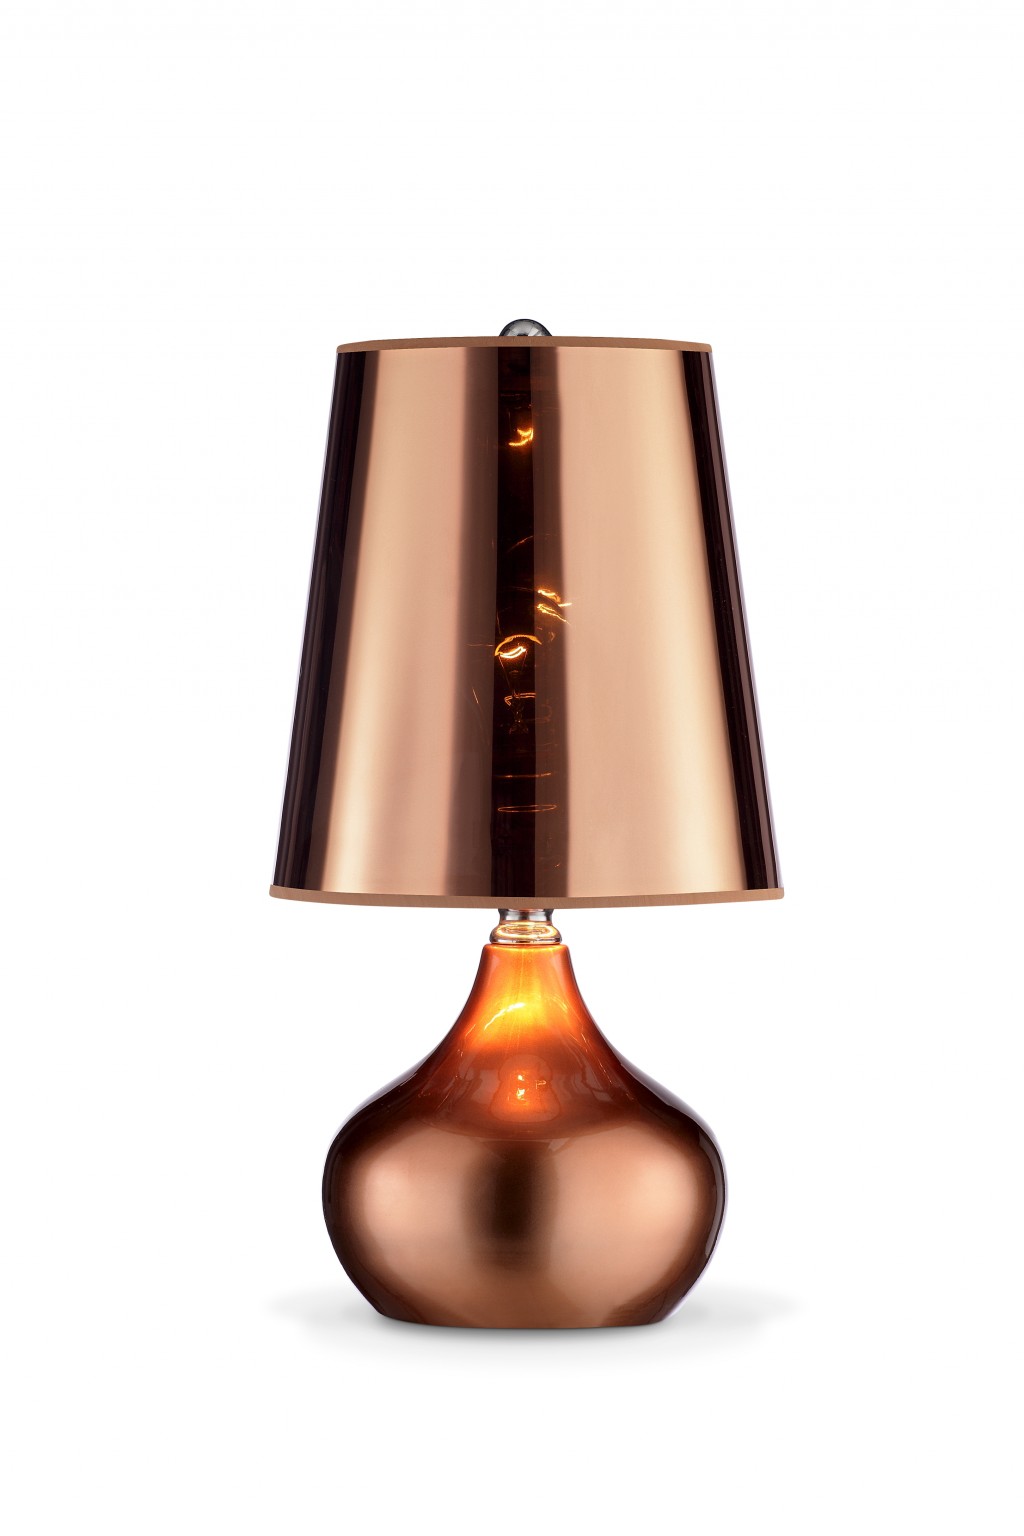 ContempoTransparent Luster Rose Gold Table Lamp